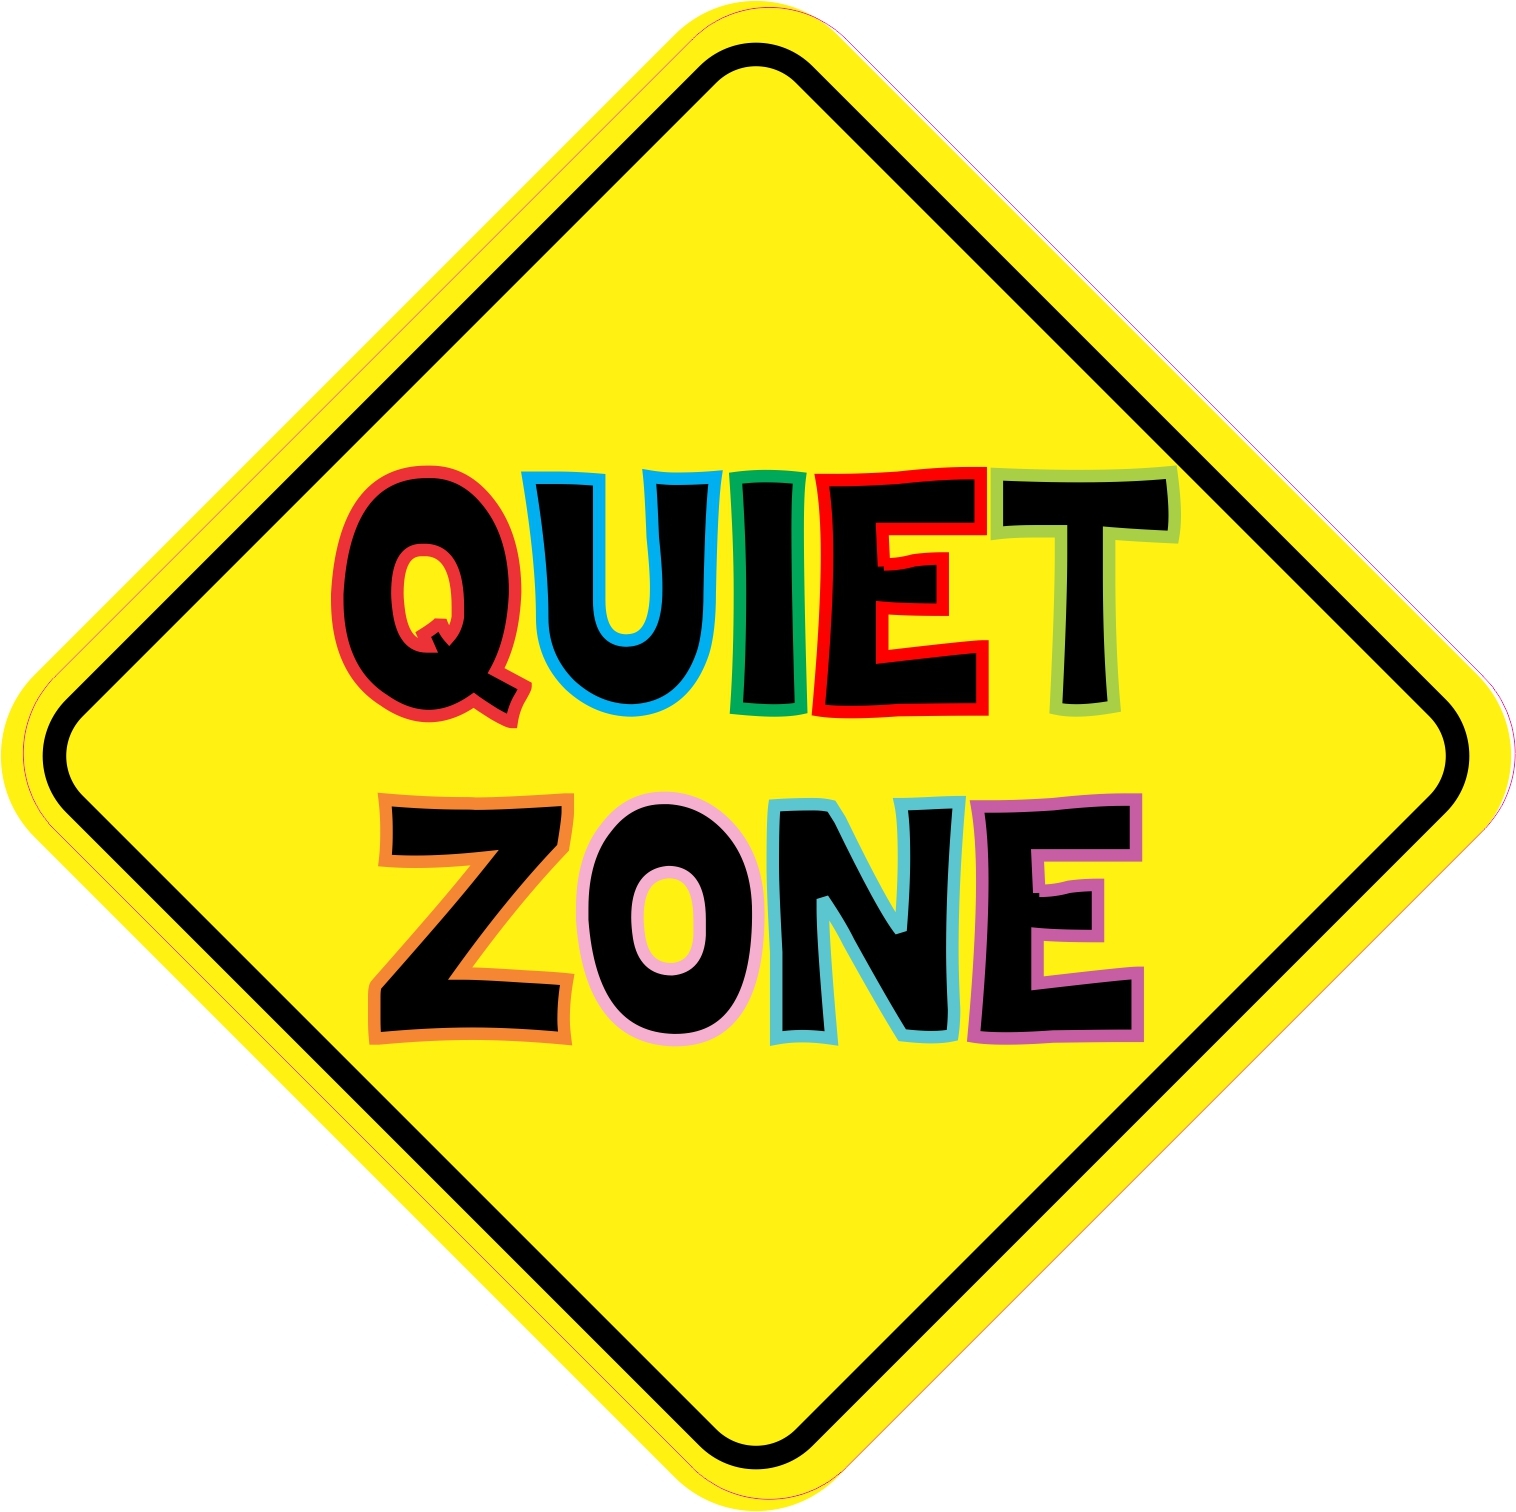 Quiet Signs - Clipart library